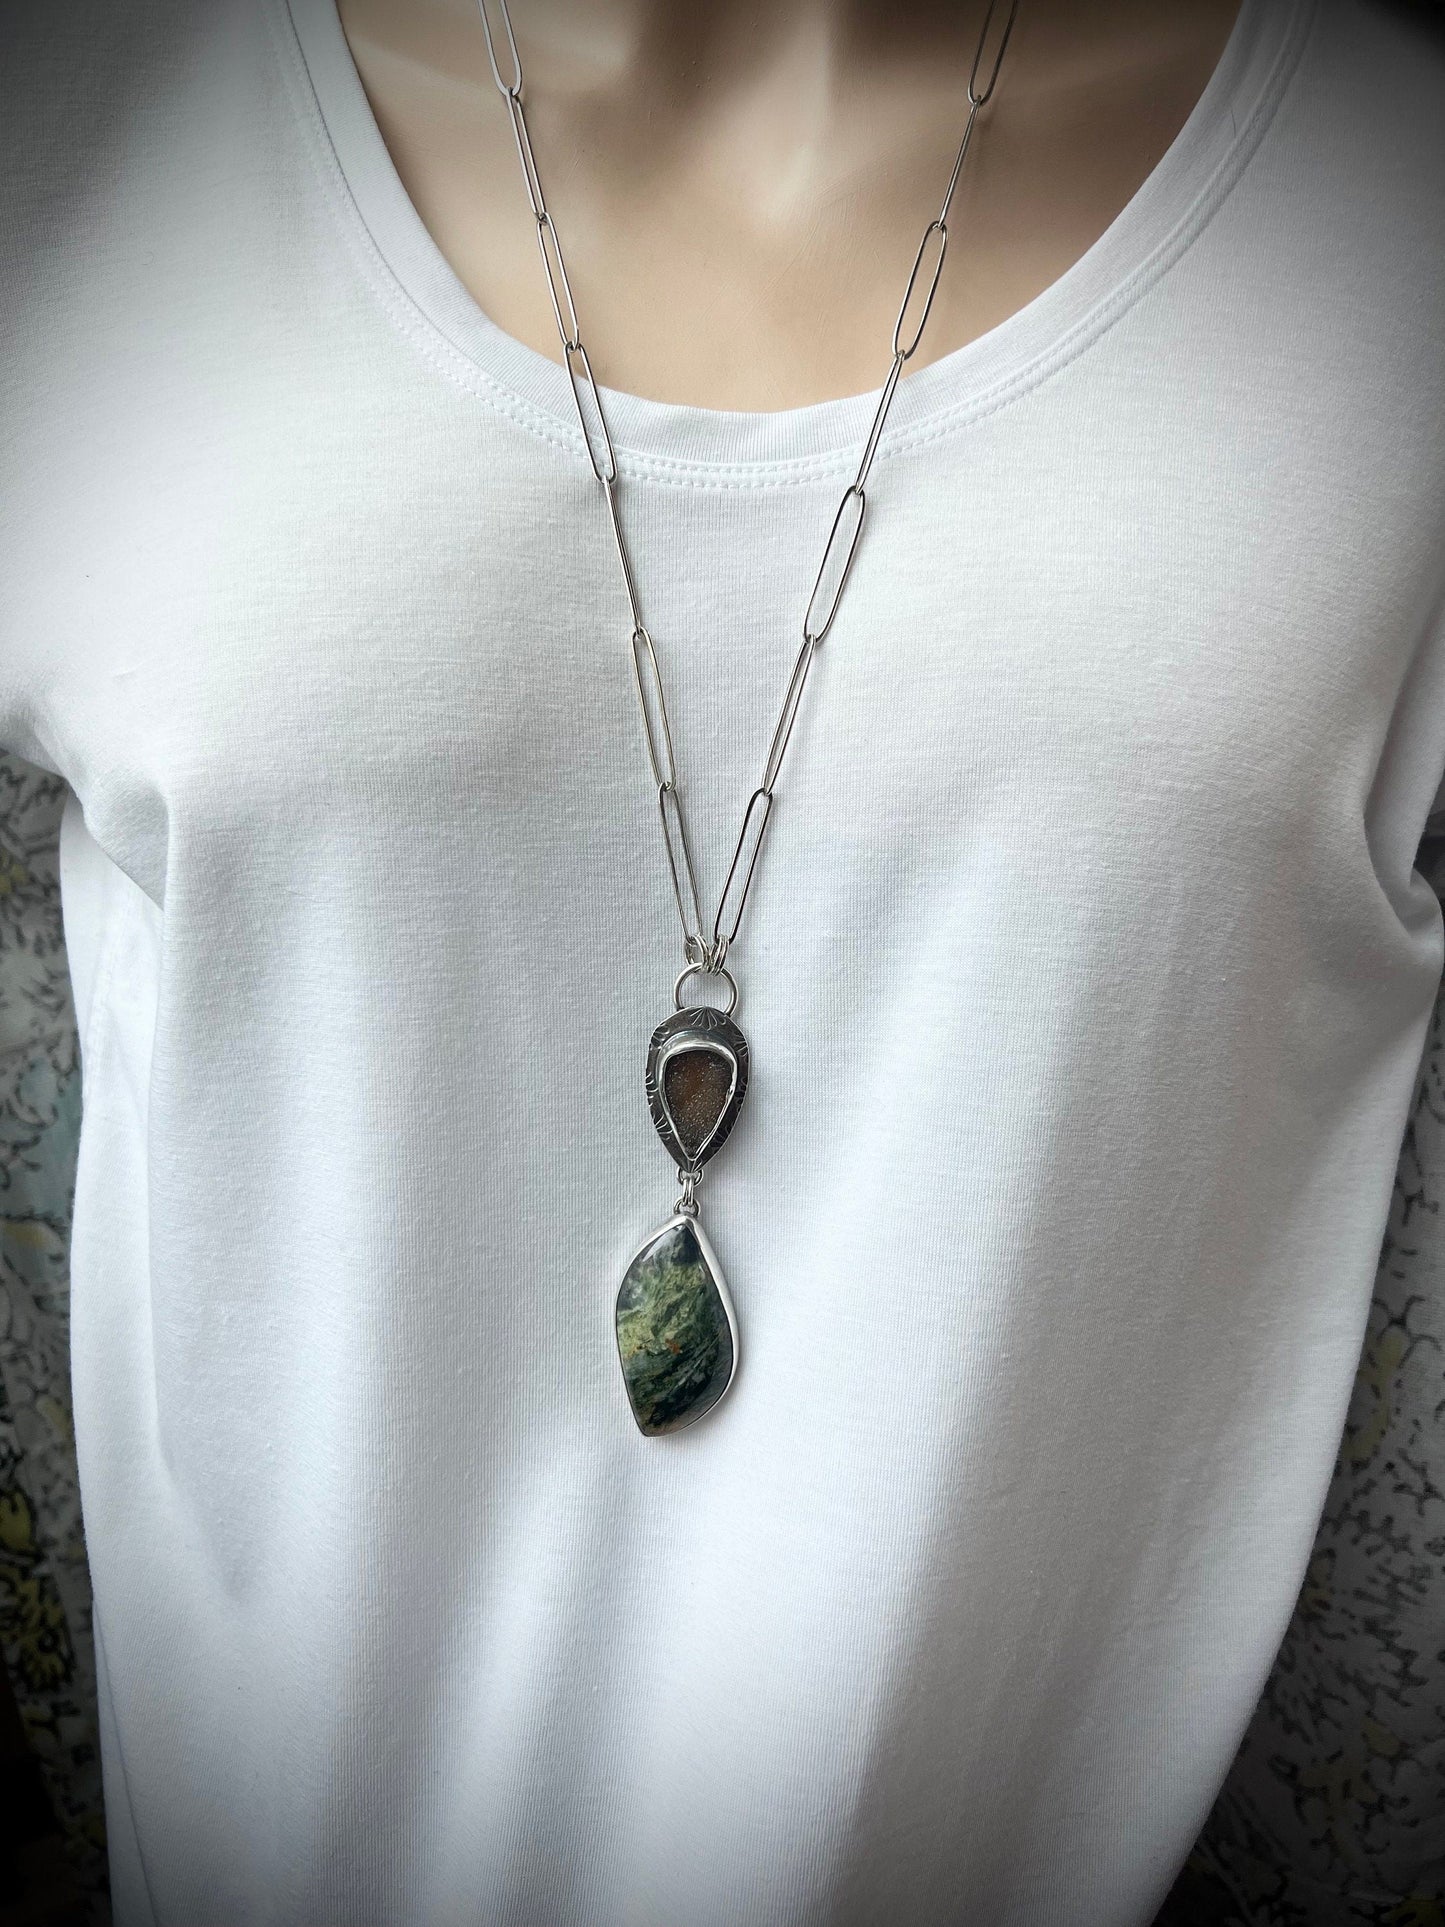 SOLD Sterling Silver Serpentine and Druzy Necklace - Handmade One-of-a-kind Pendant on Elongated Sterling Silver Chain